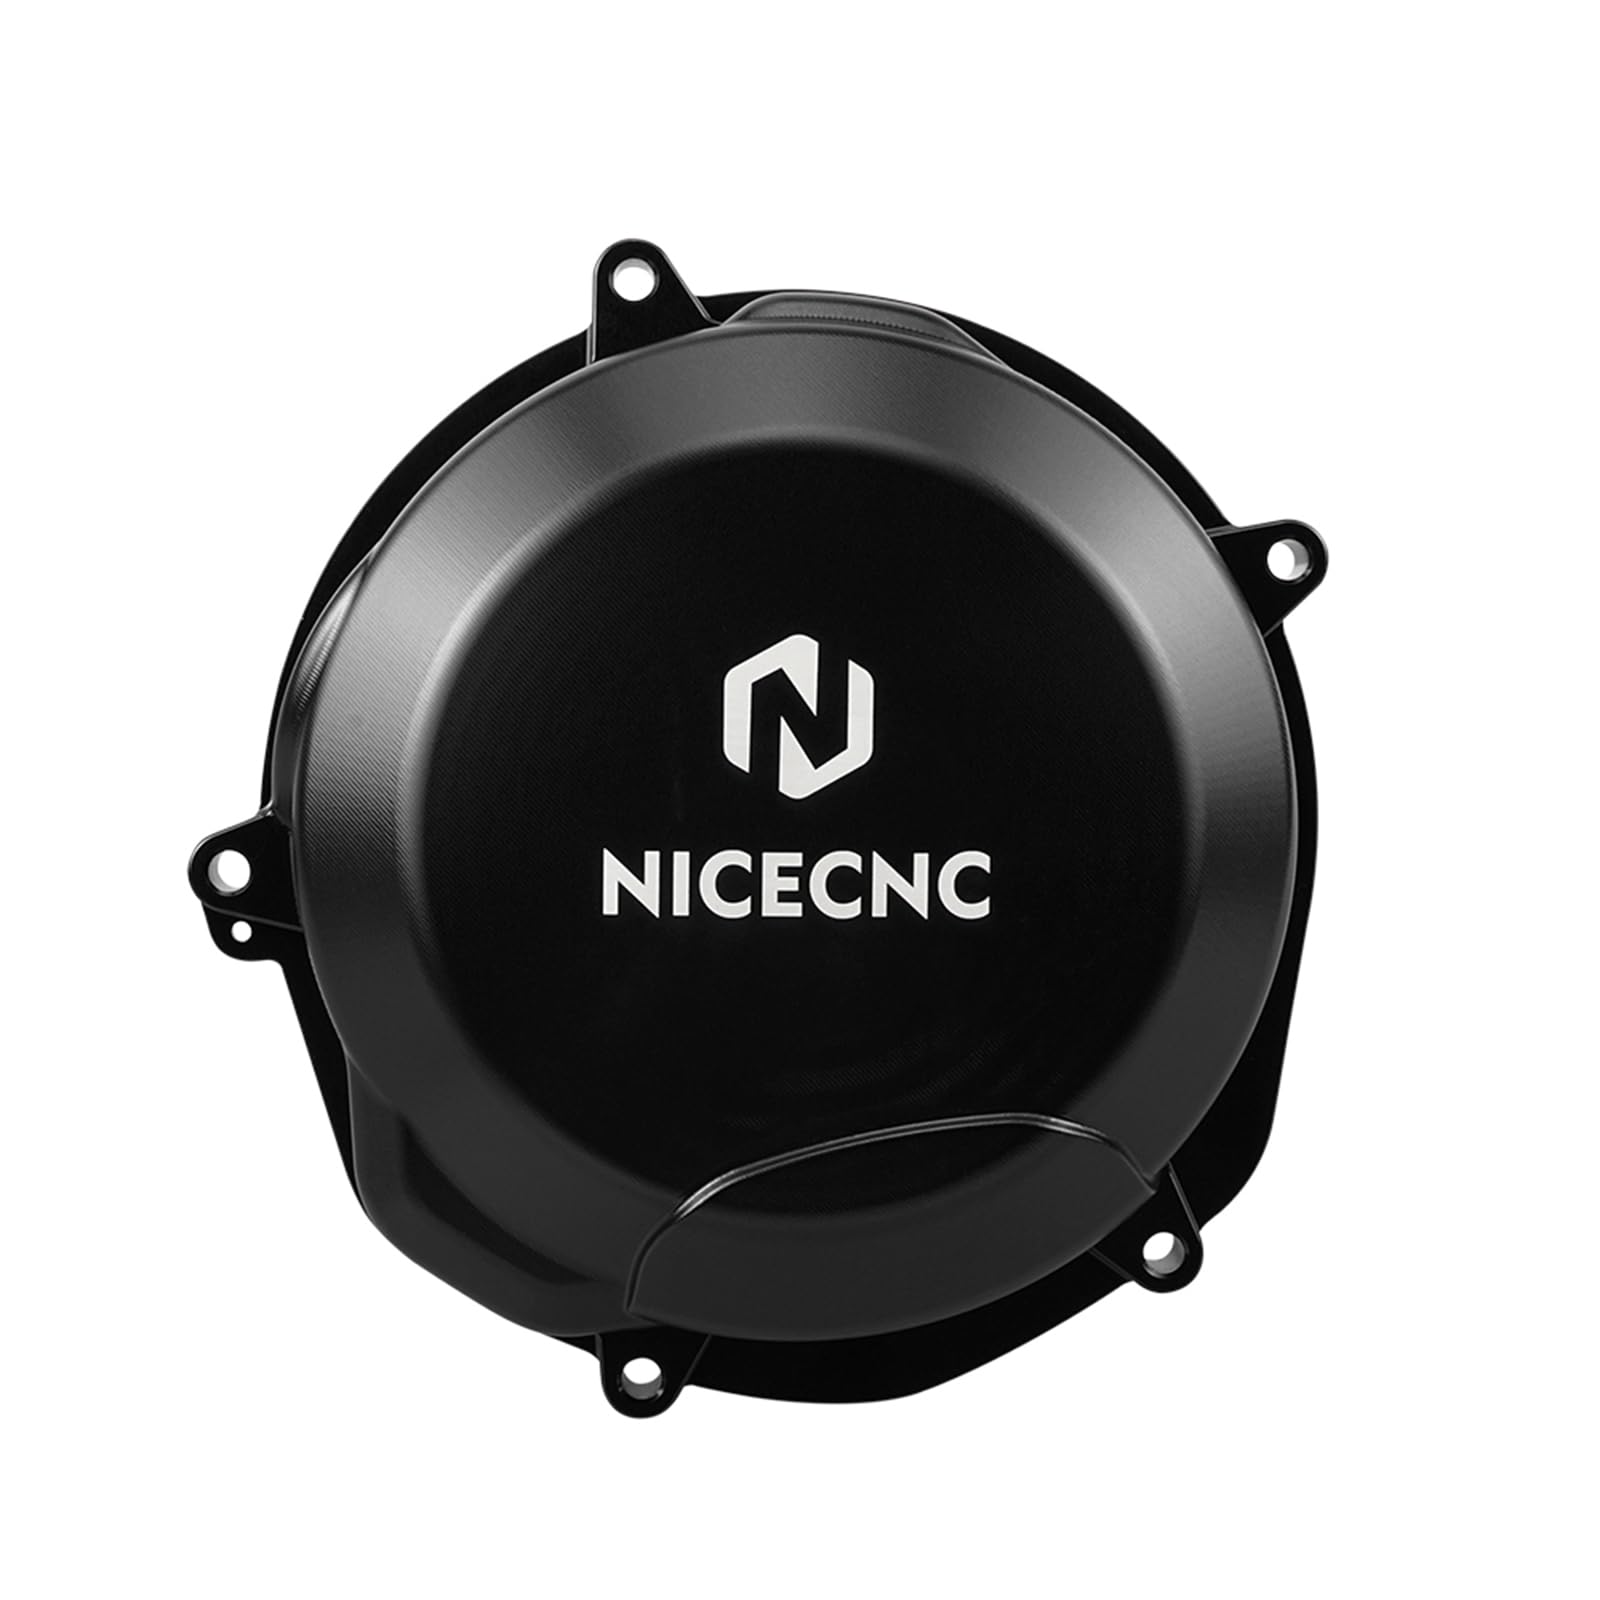 NICECNC Black Reinforced Clutch Cover Guard 4 Strokes Compatible with Beta RR RS 350 390 430 480 2020-2022 von NICECNC